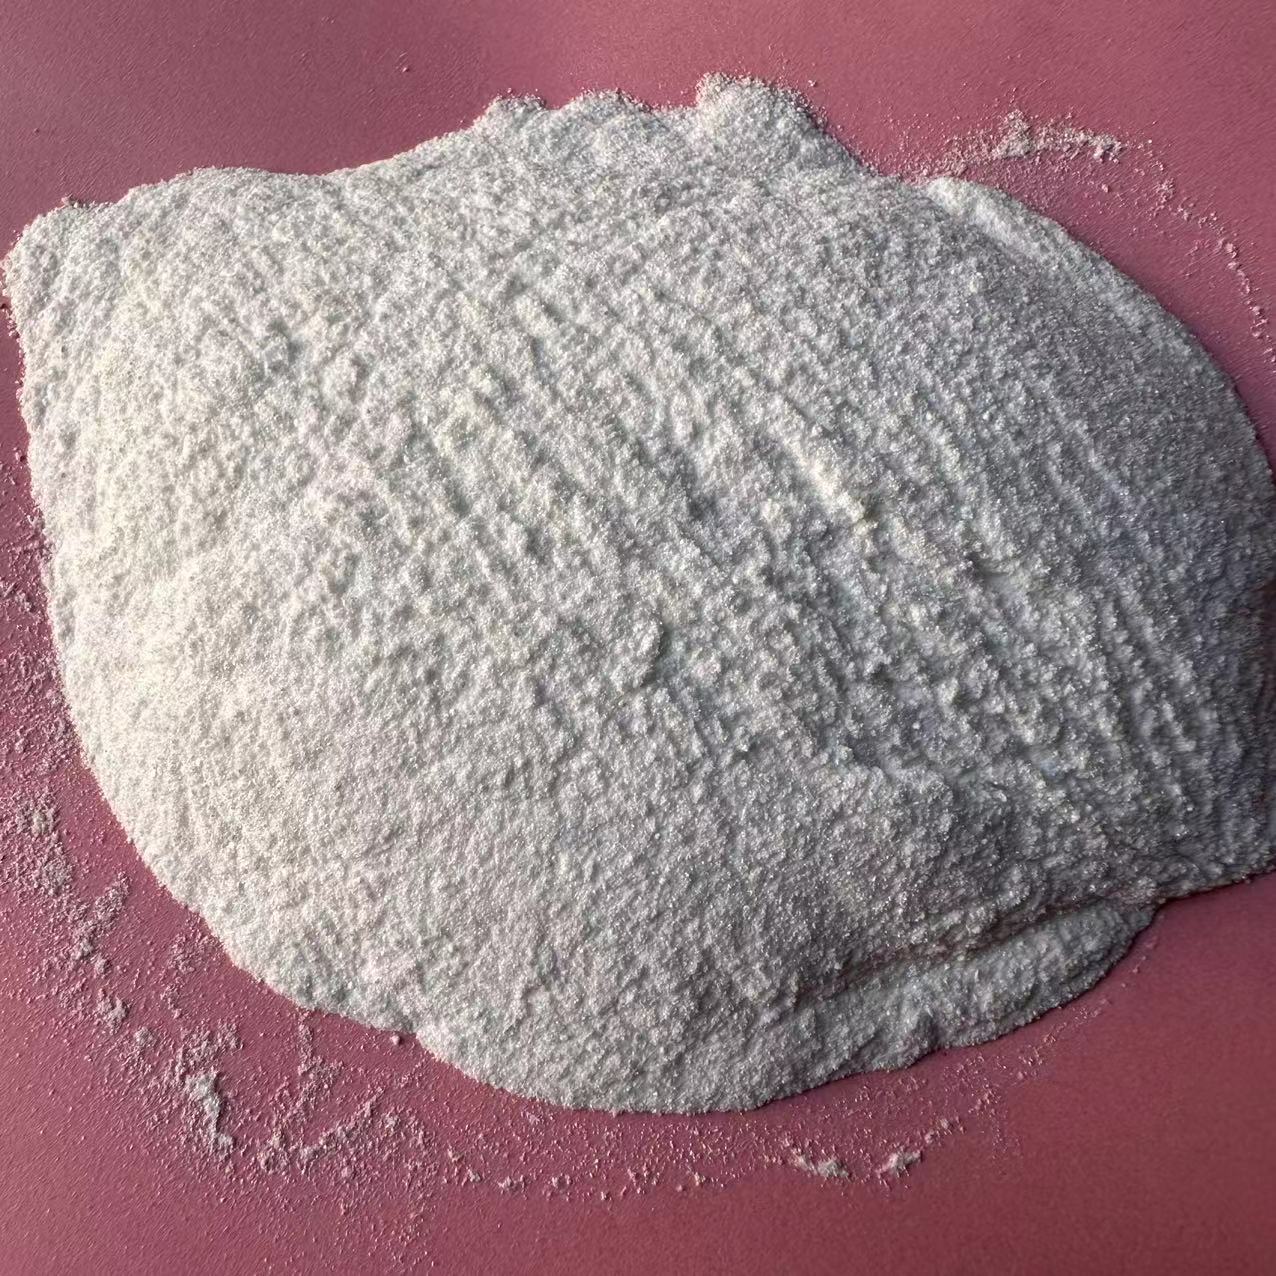 S-2-Benzothiazolyl 2-amino-alpha-(methoxyimino)-4-thiazolethiolacetate  Chris Sales Manager Email: sales9@chuanghaibio.com Whatsapp/Wechat:+8613131127579 Tel:+8613131127579 http://www.chuanghaibio.com Provide Sample: Available Certification: COA / MSDS / ISO / SDS Shelf Life: 2-3Years 99